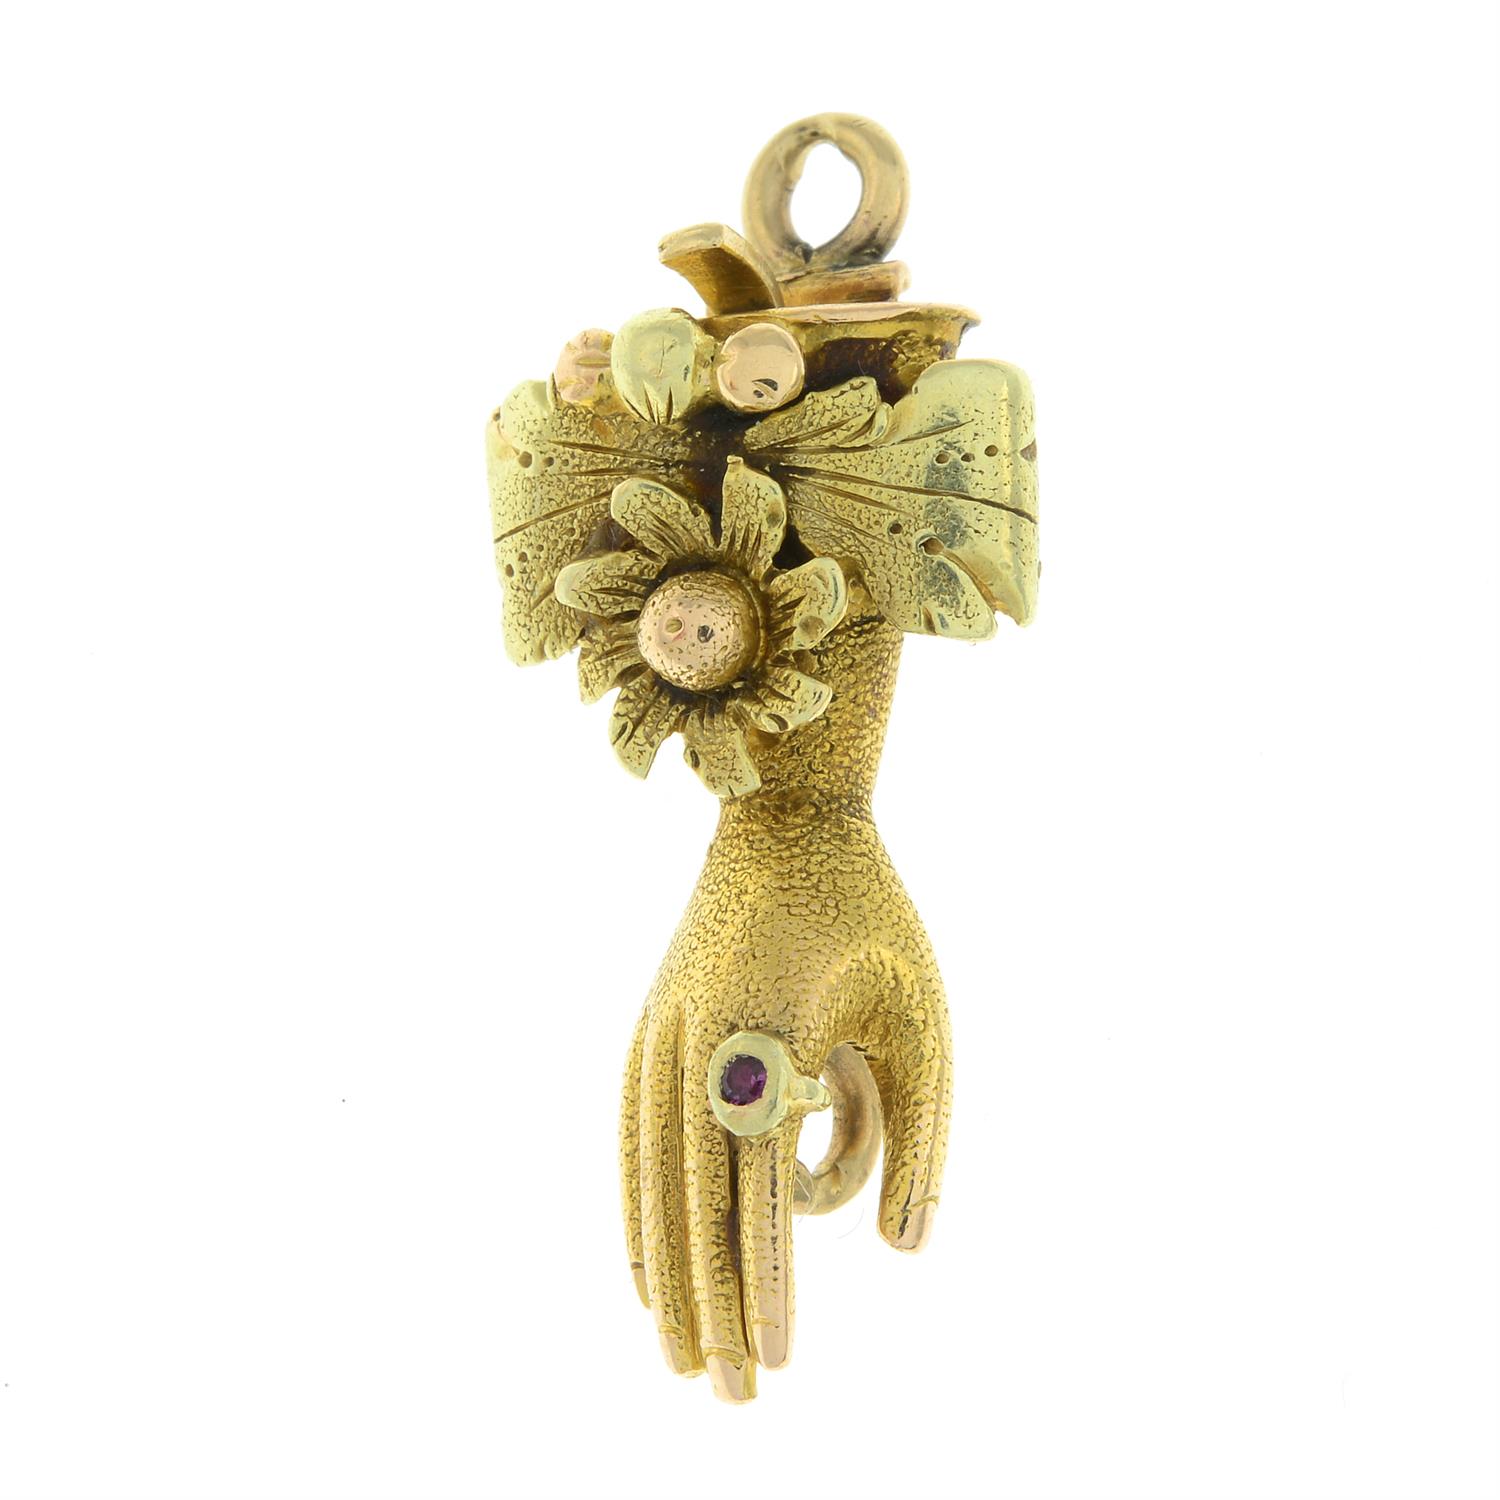 19th century gold and ruby gloved hand clasp - Image 2 of 6